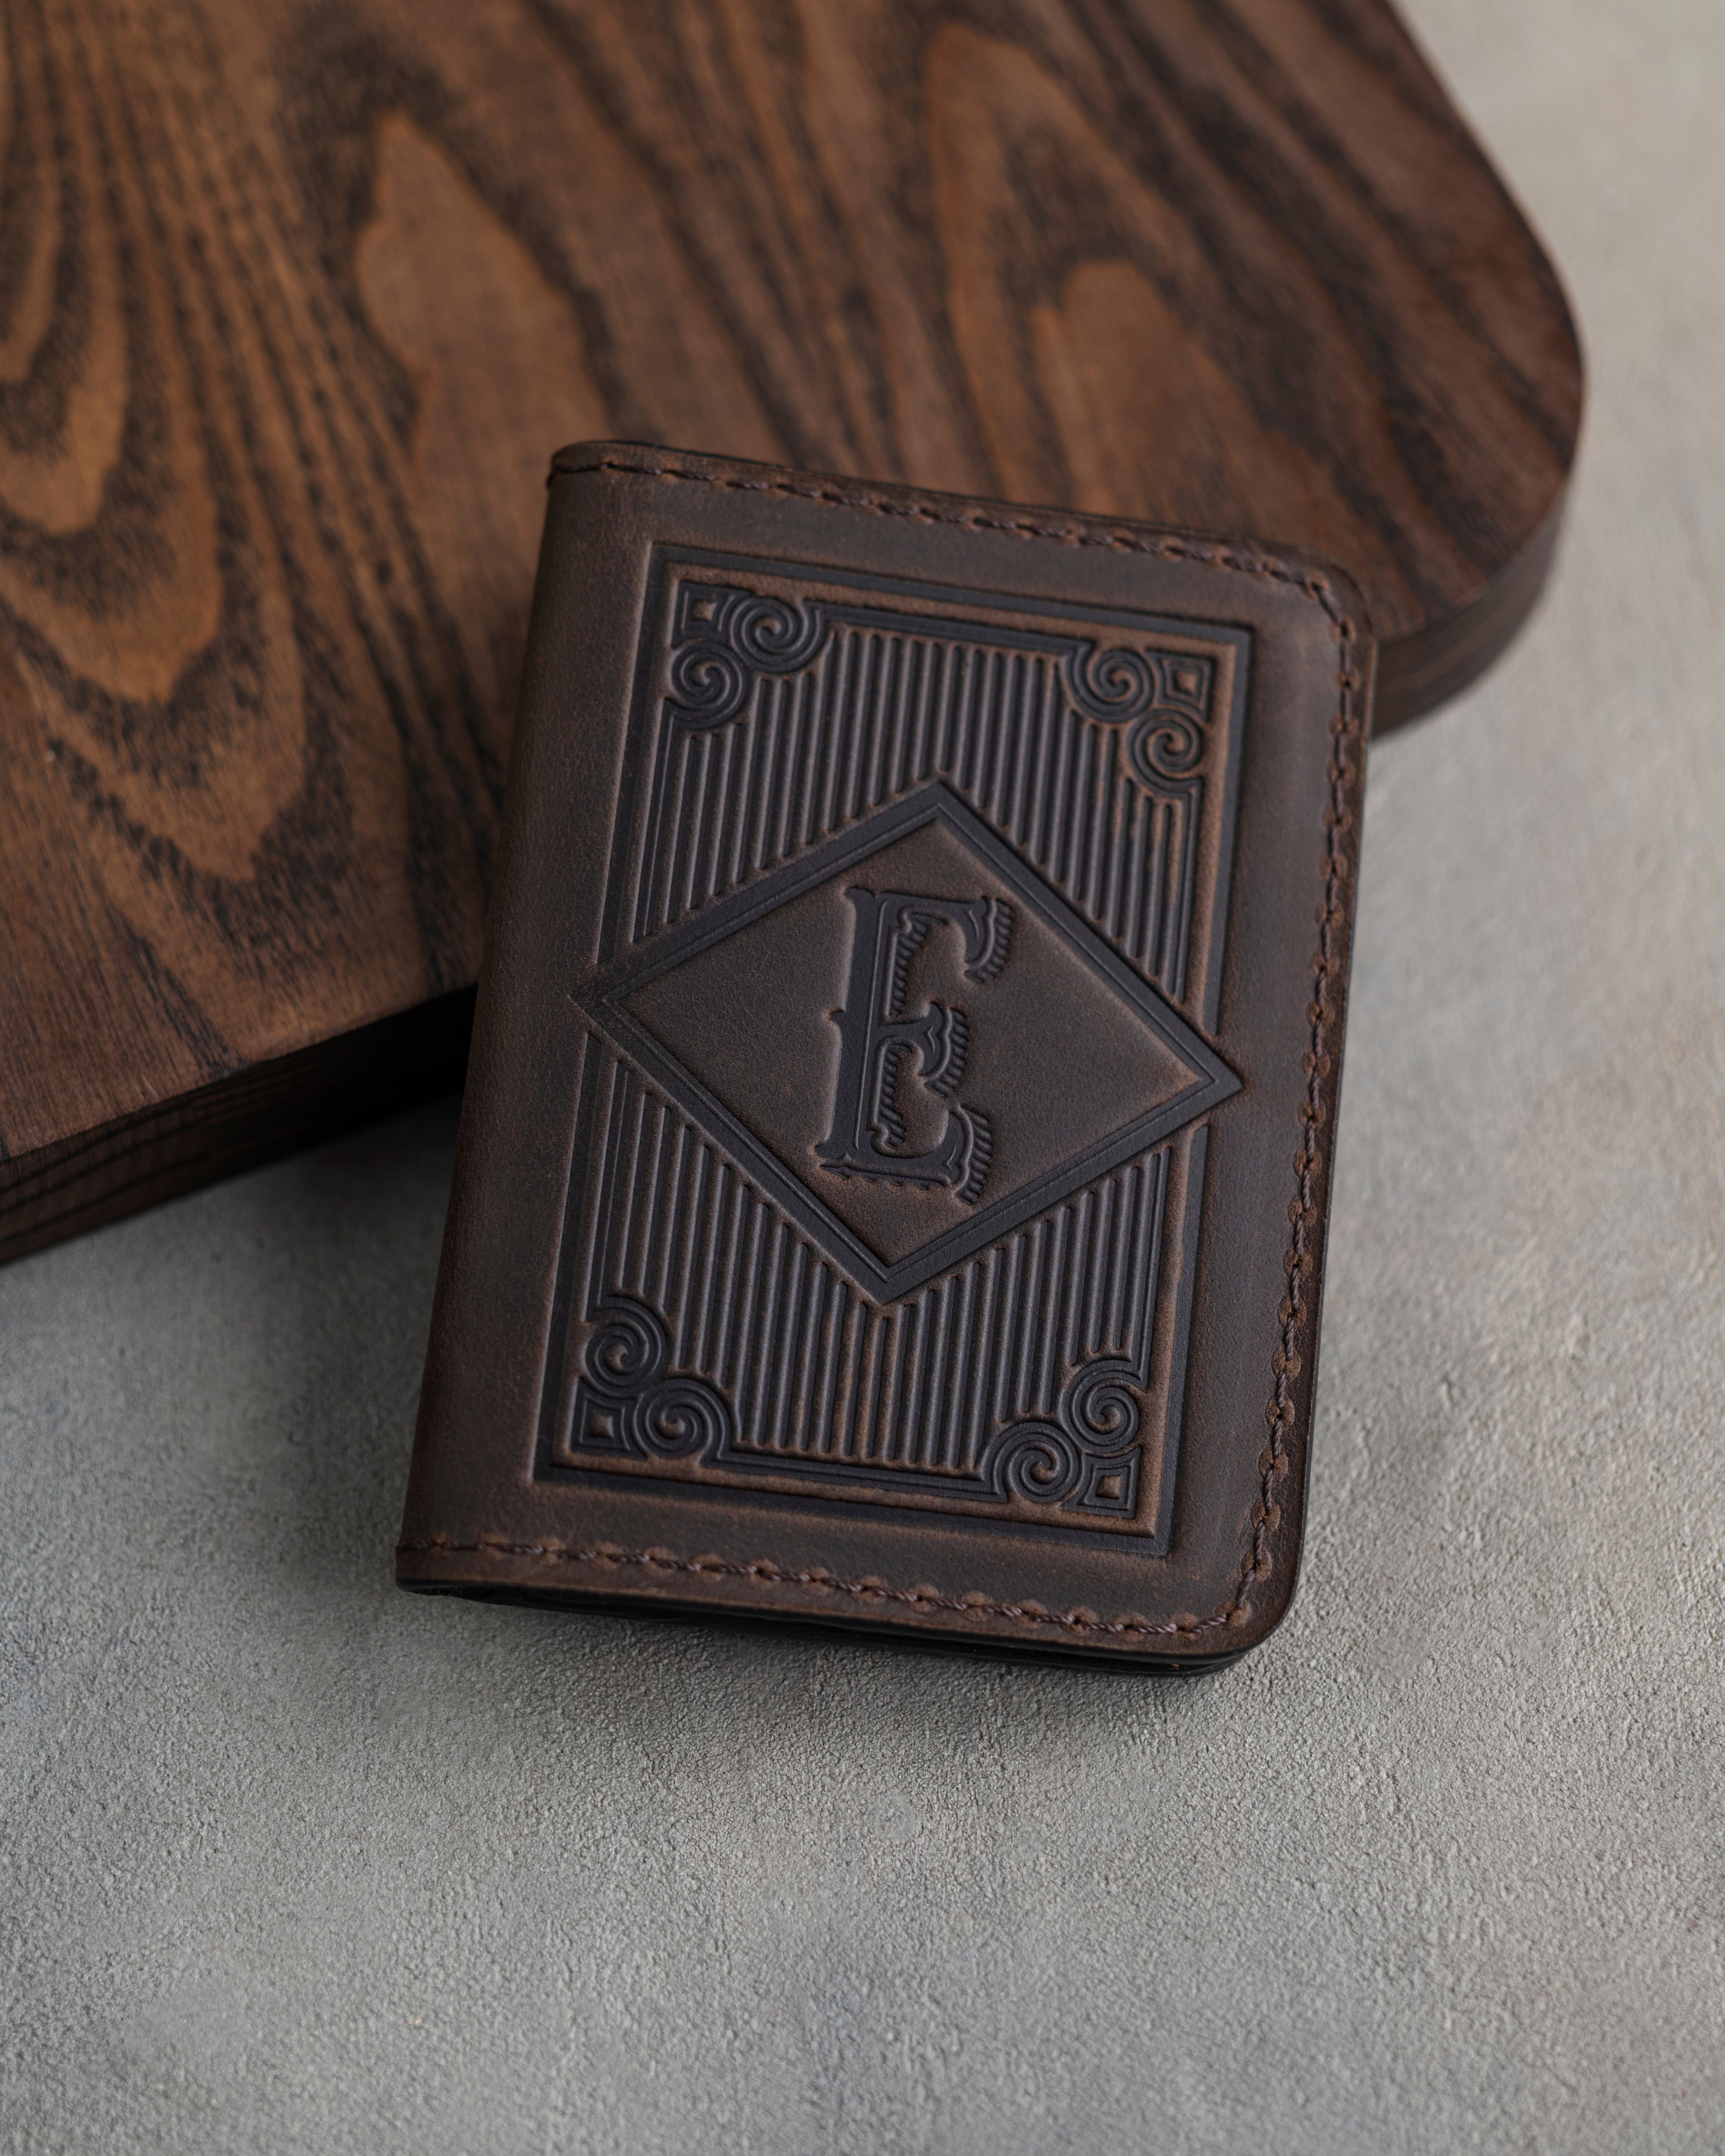 Unique Leather Personalized Gifts for the Person Who Has Everything